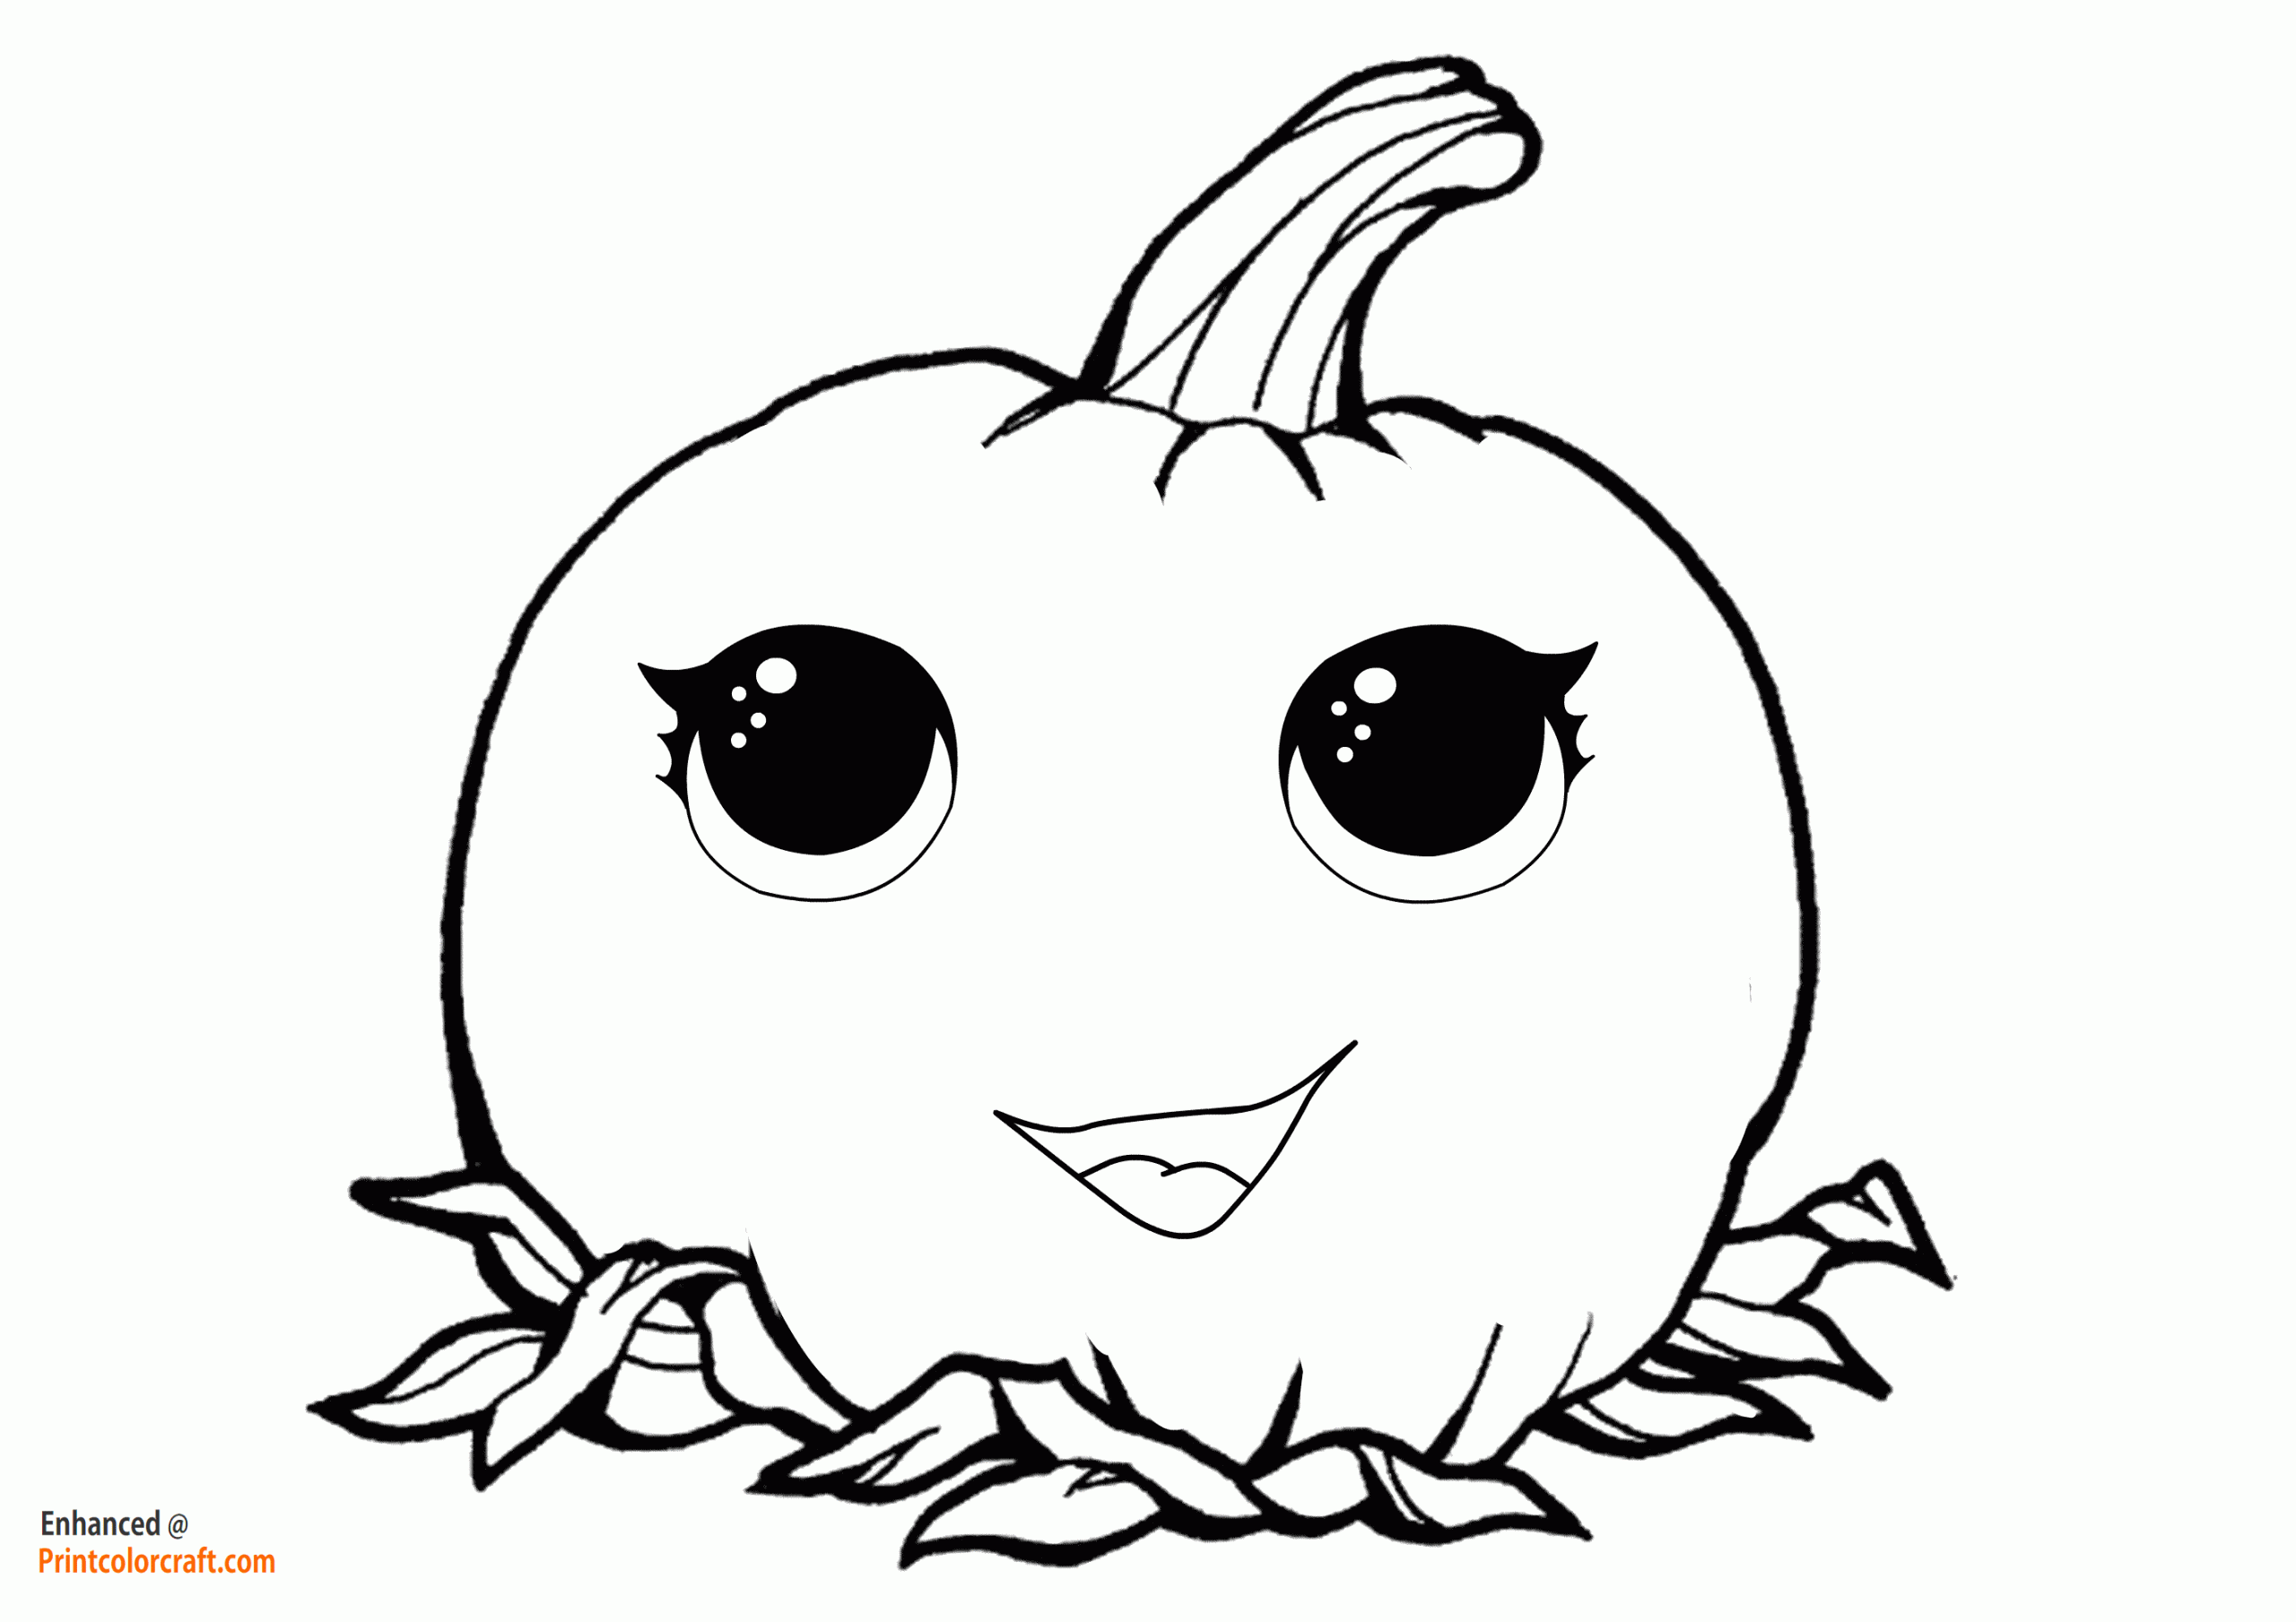 Cute & Pretty Plain Pumpkin Coloring Pages for Toddlers Fall Season Activities